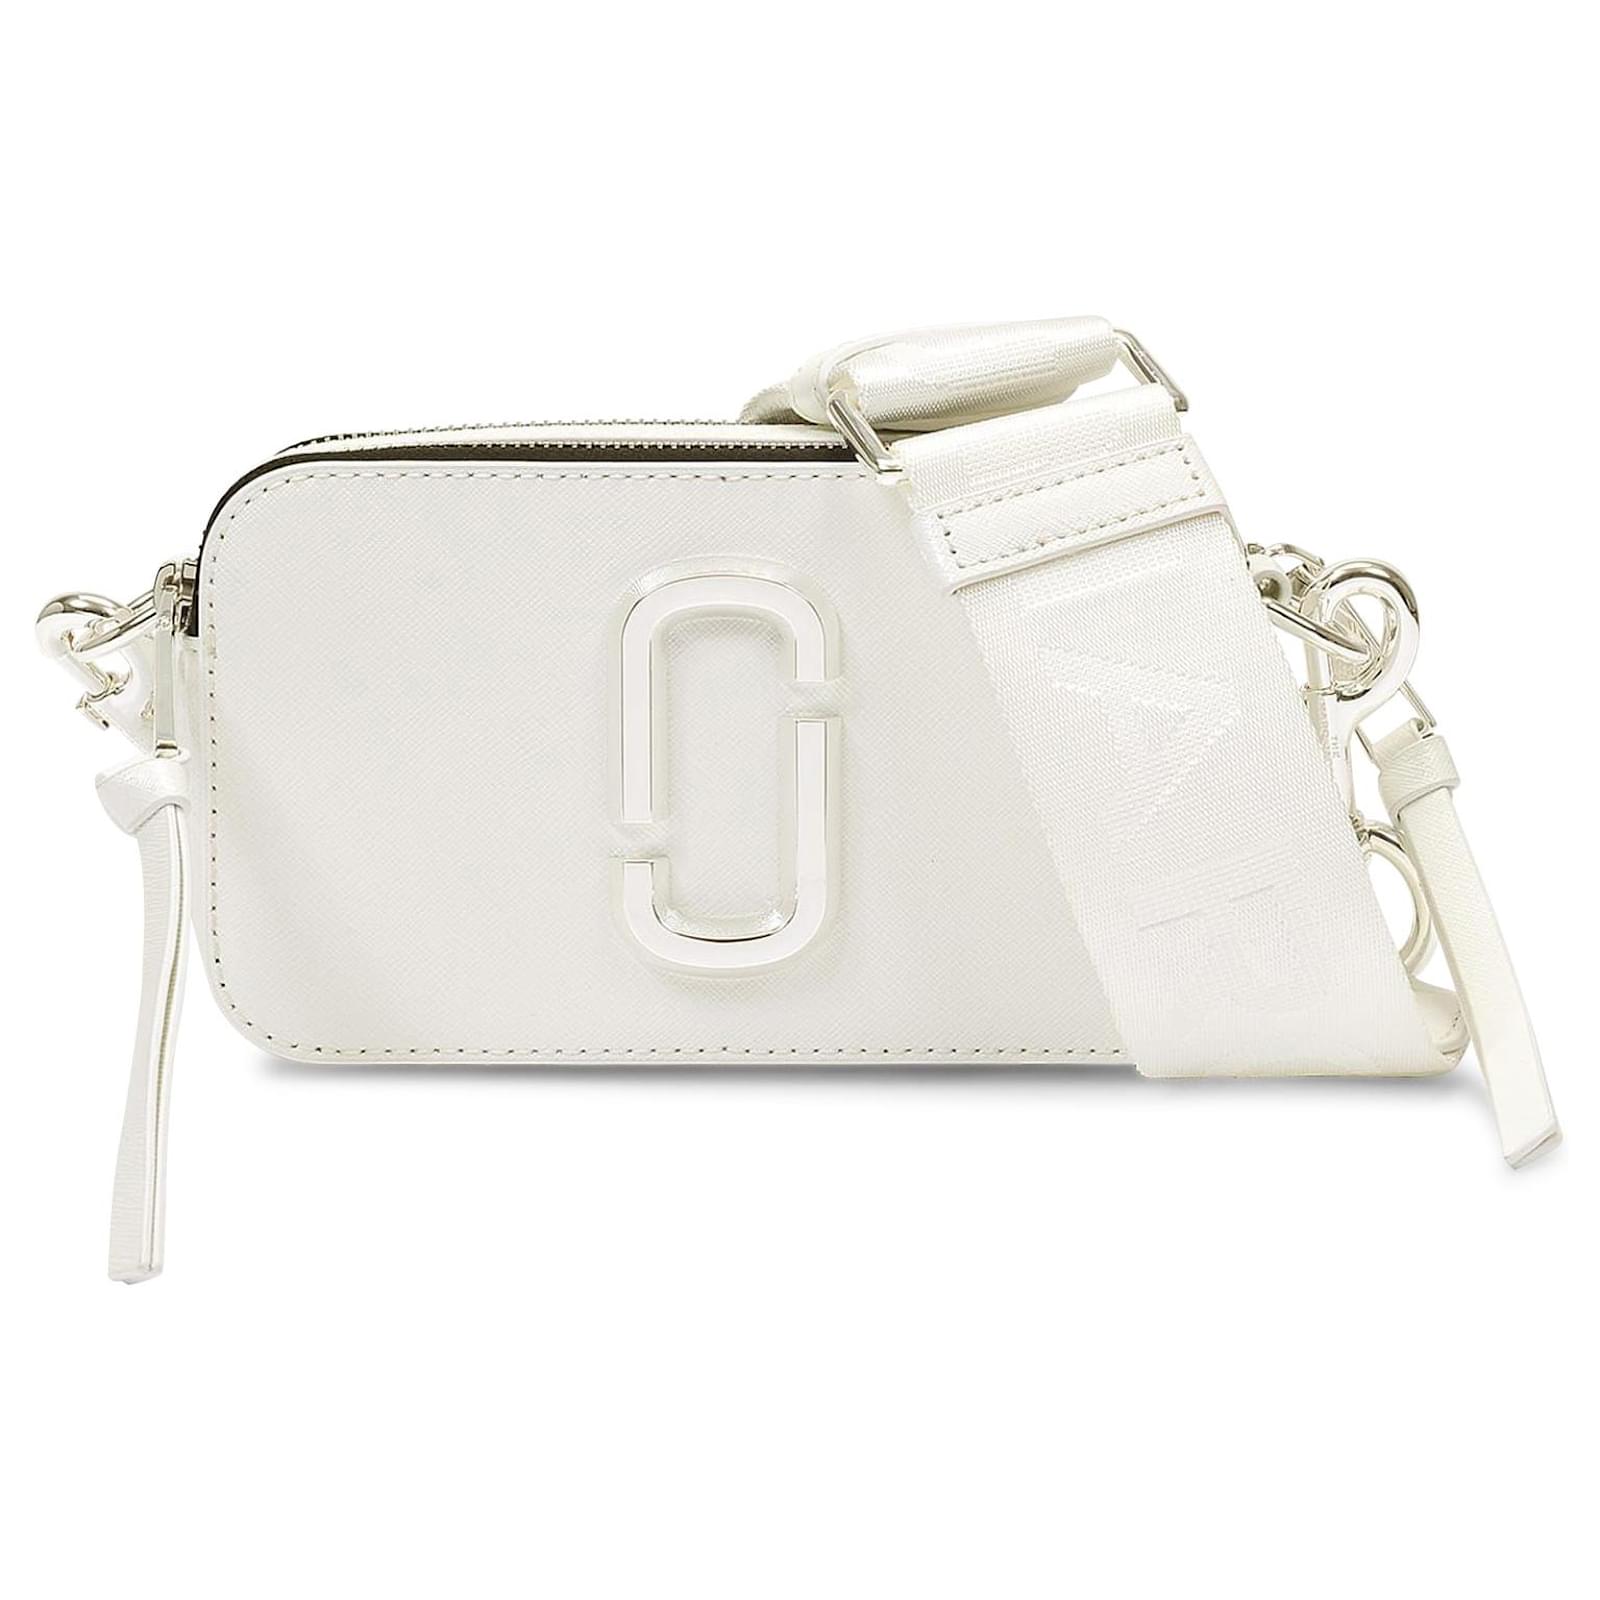 Marc Jacobs The Cushion Bag White Ivory | Bags, Everyday purse, White bag